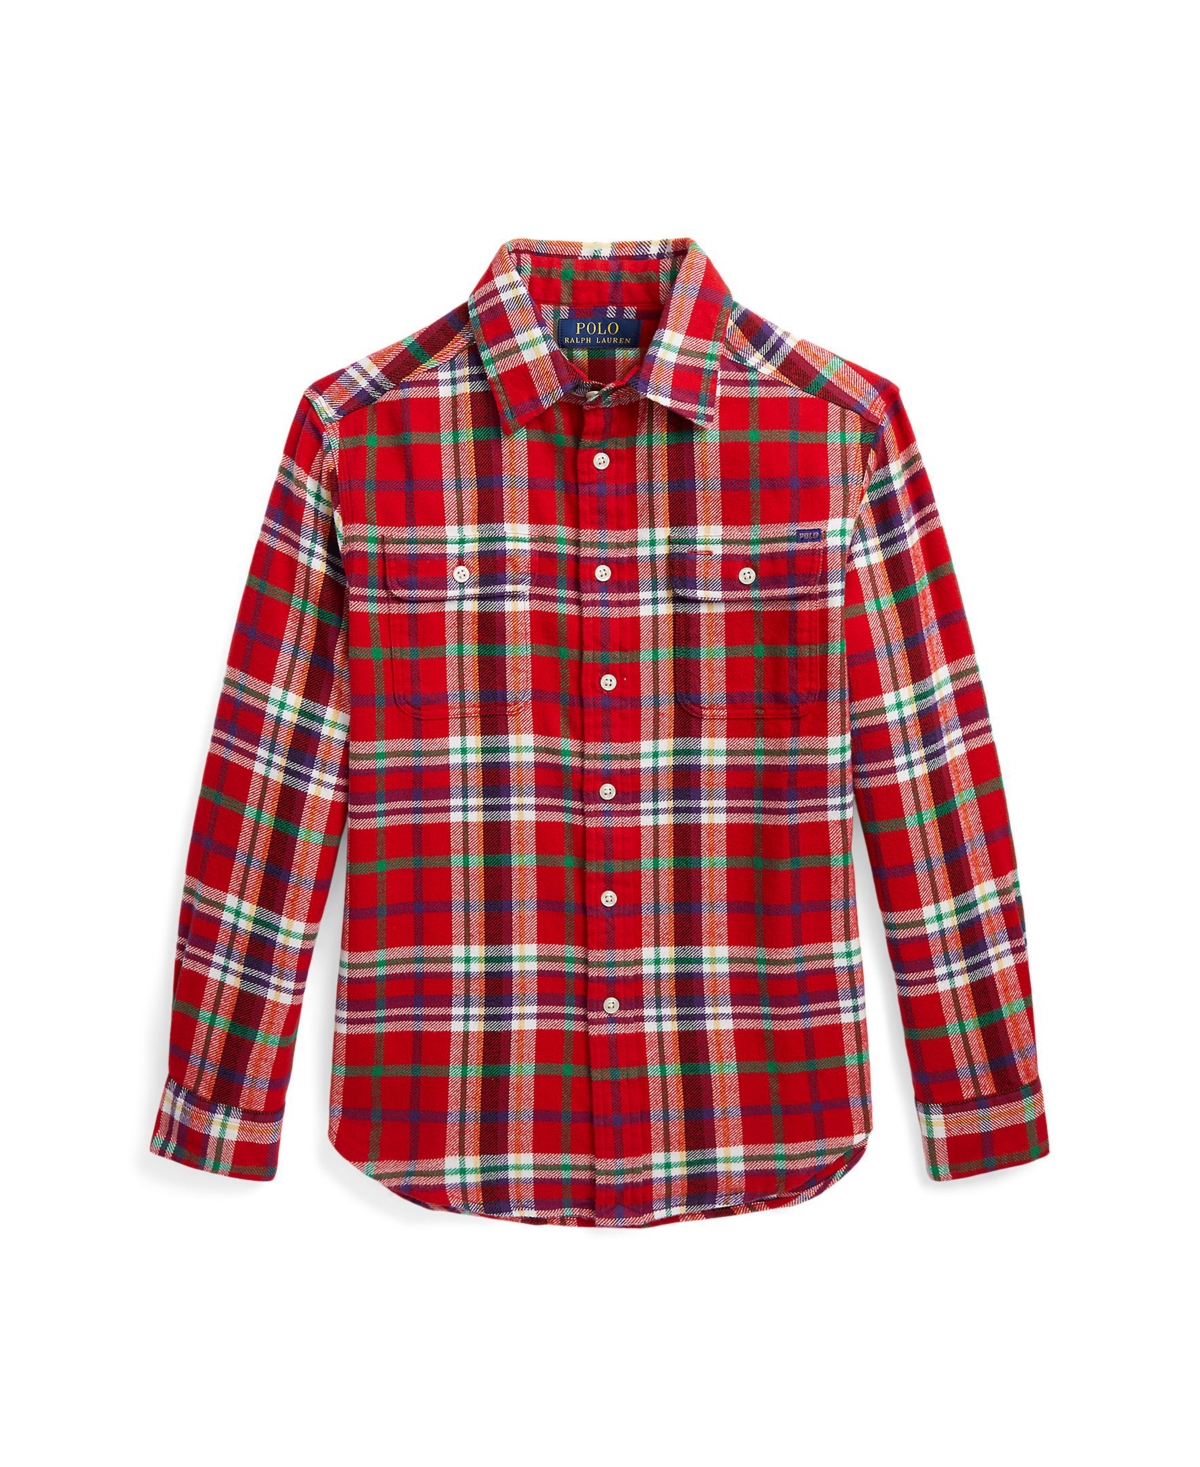 Polo Ralph Lauren Kids' Little And Toddler Boys Plaid Cotton Flannel Shirt In Red,white Multi